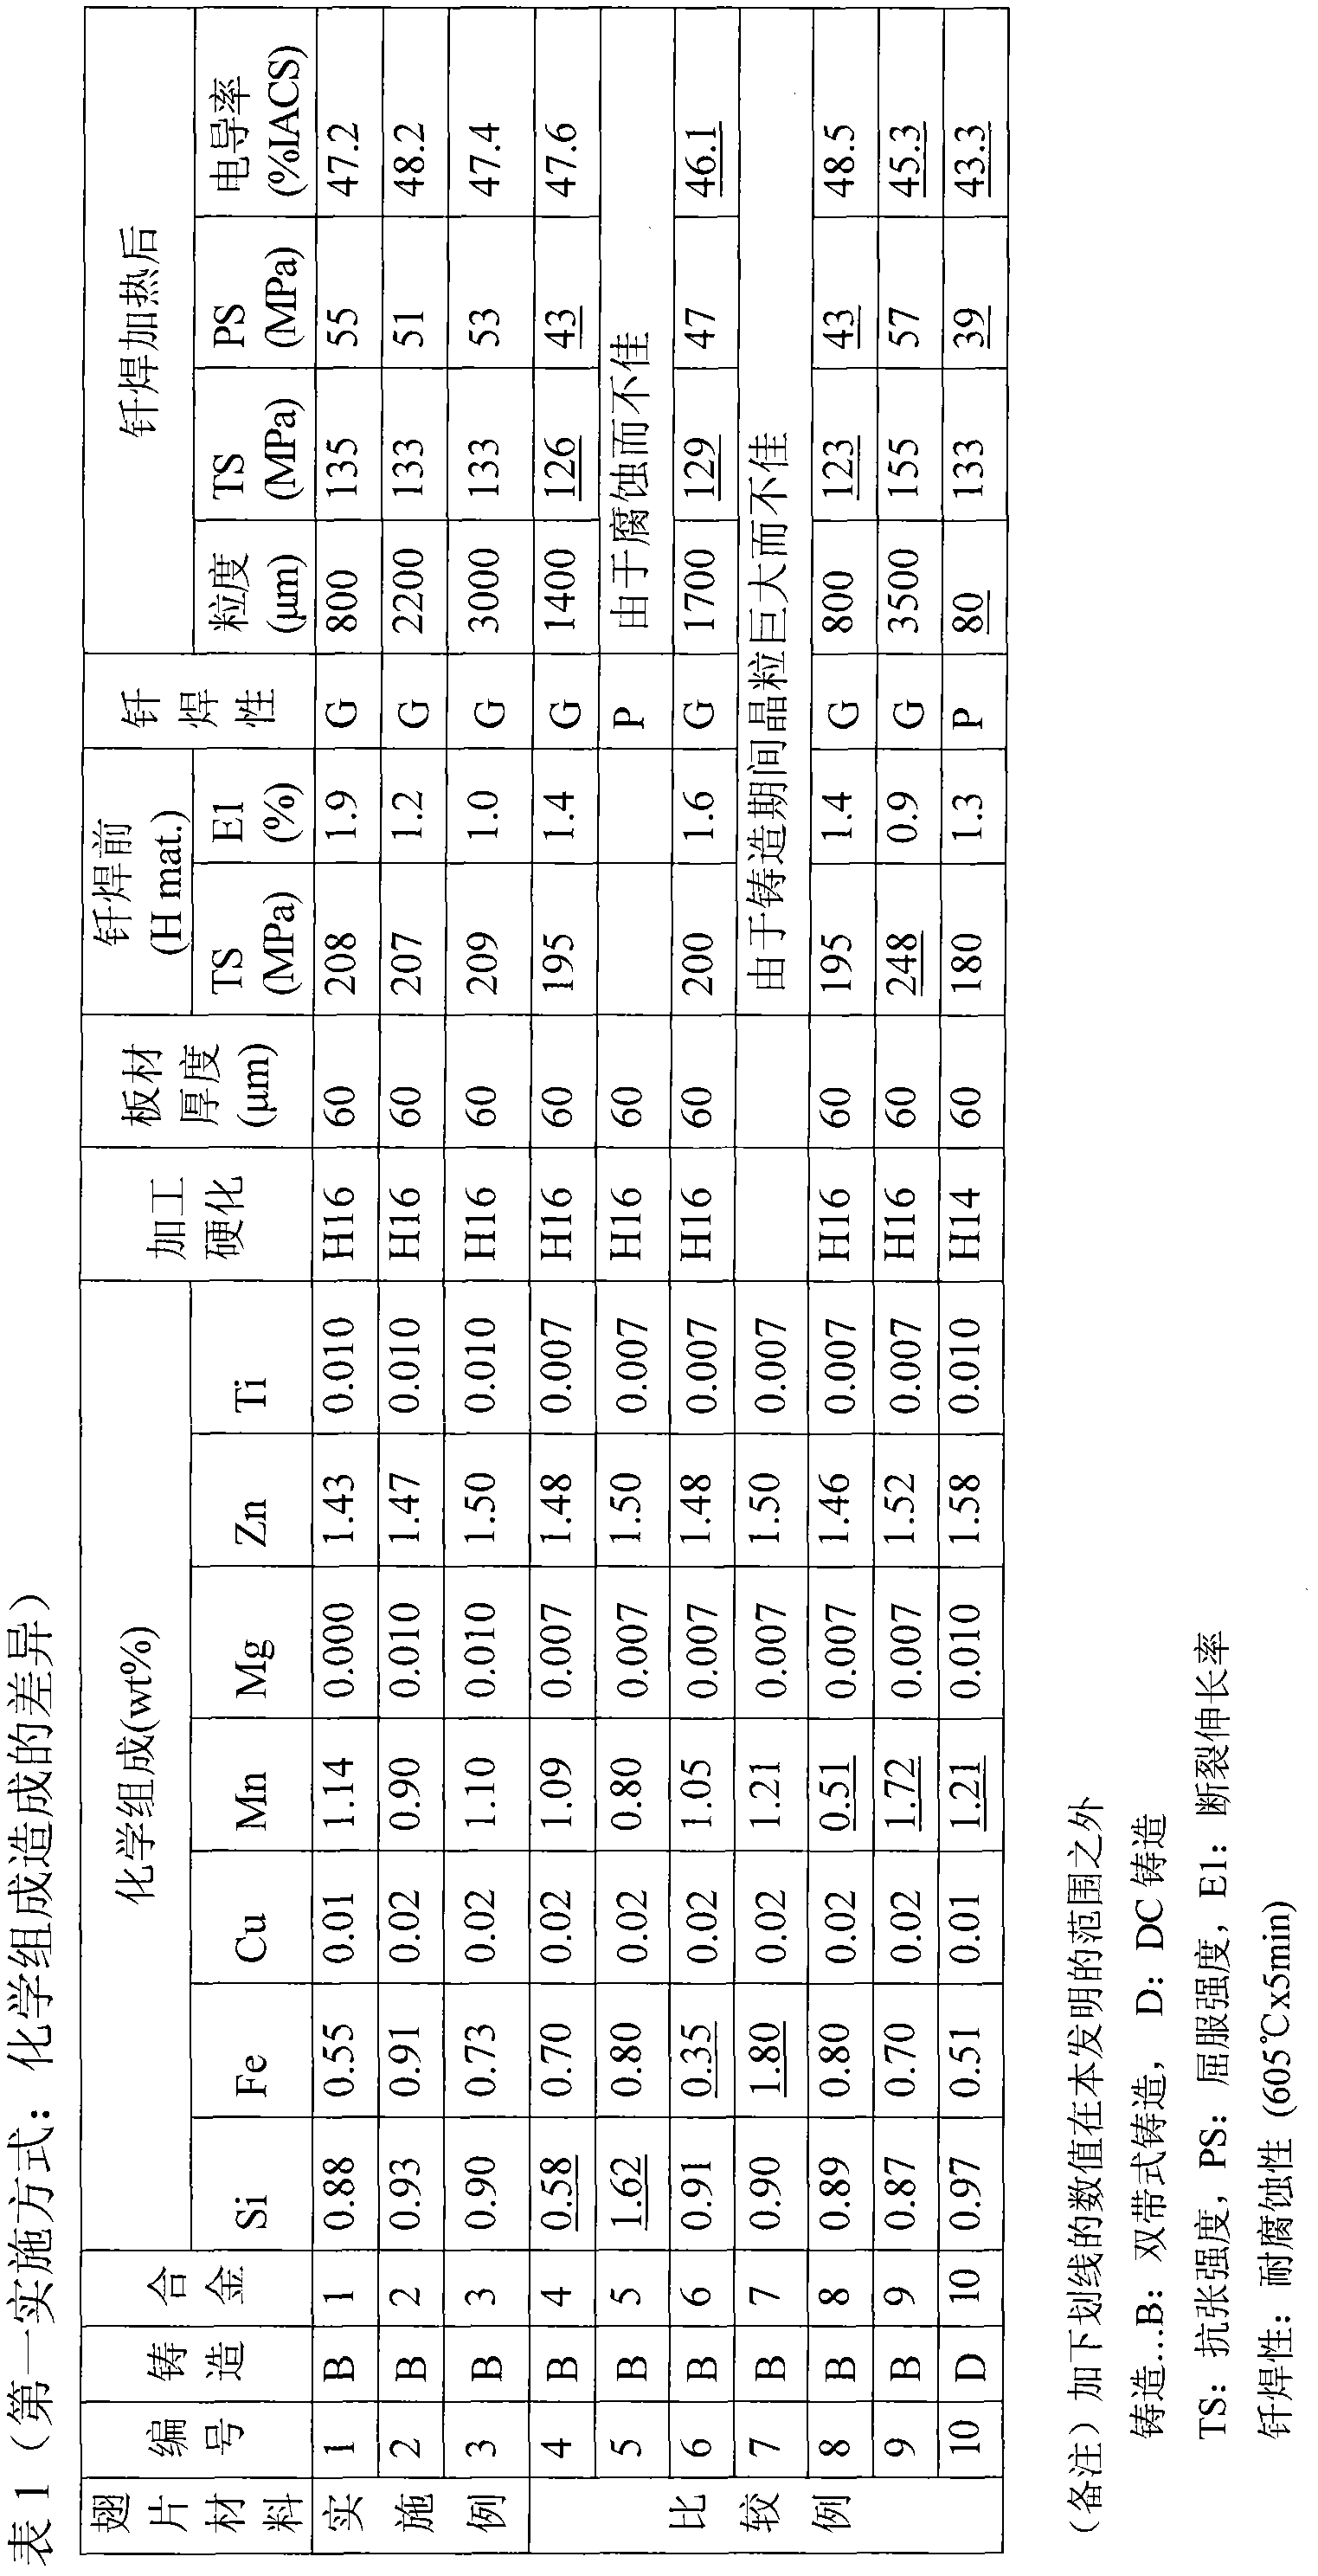 Aluminum alloy fin material for heat exchanger and method ofproduction of same and method of production of heat exchanger by brazing fin material